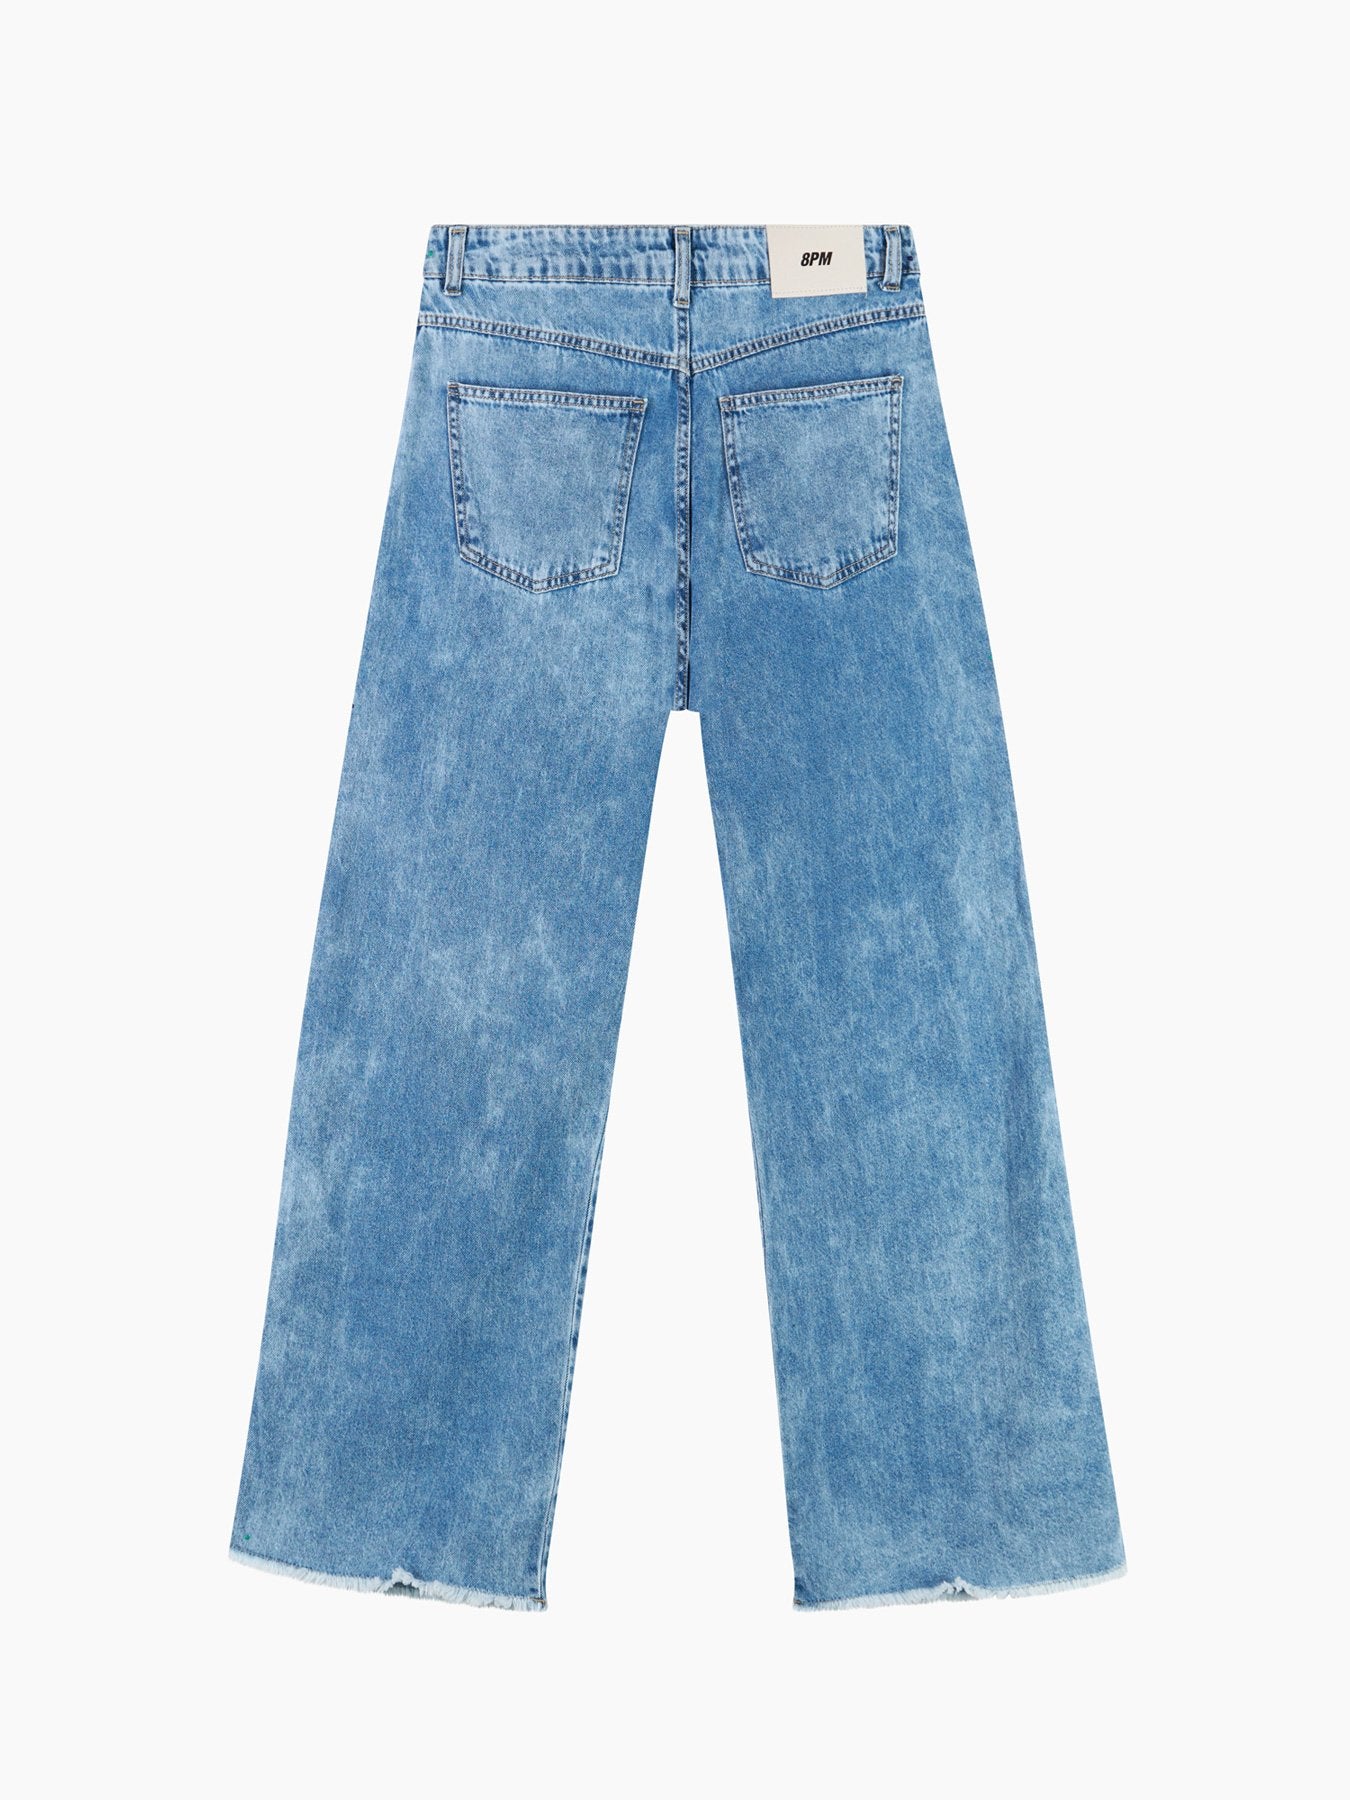 Fluid canvas denim with darts at the front